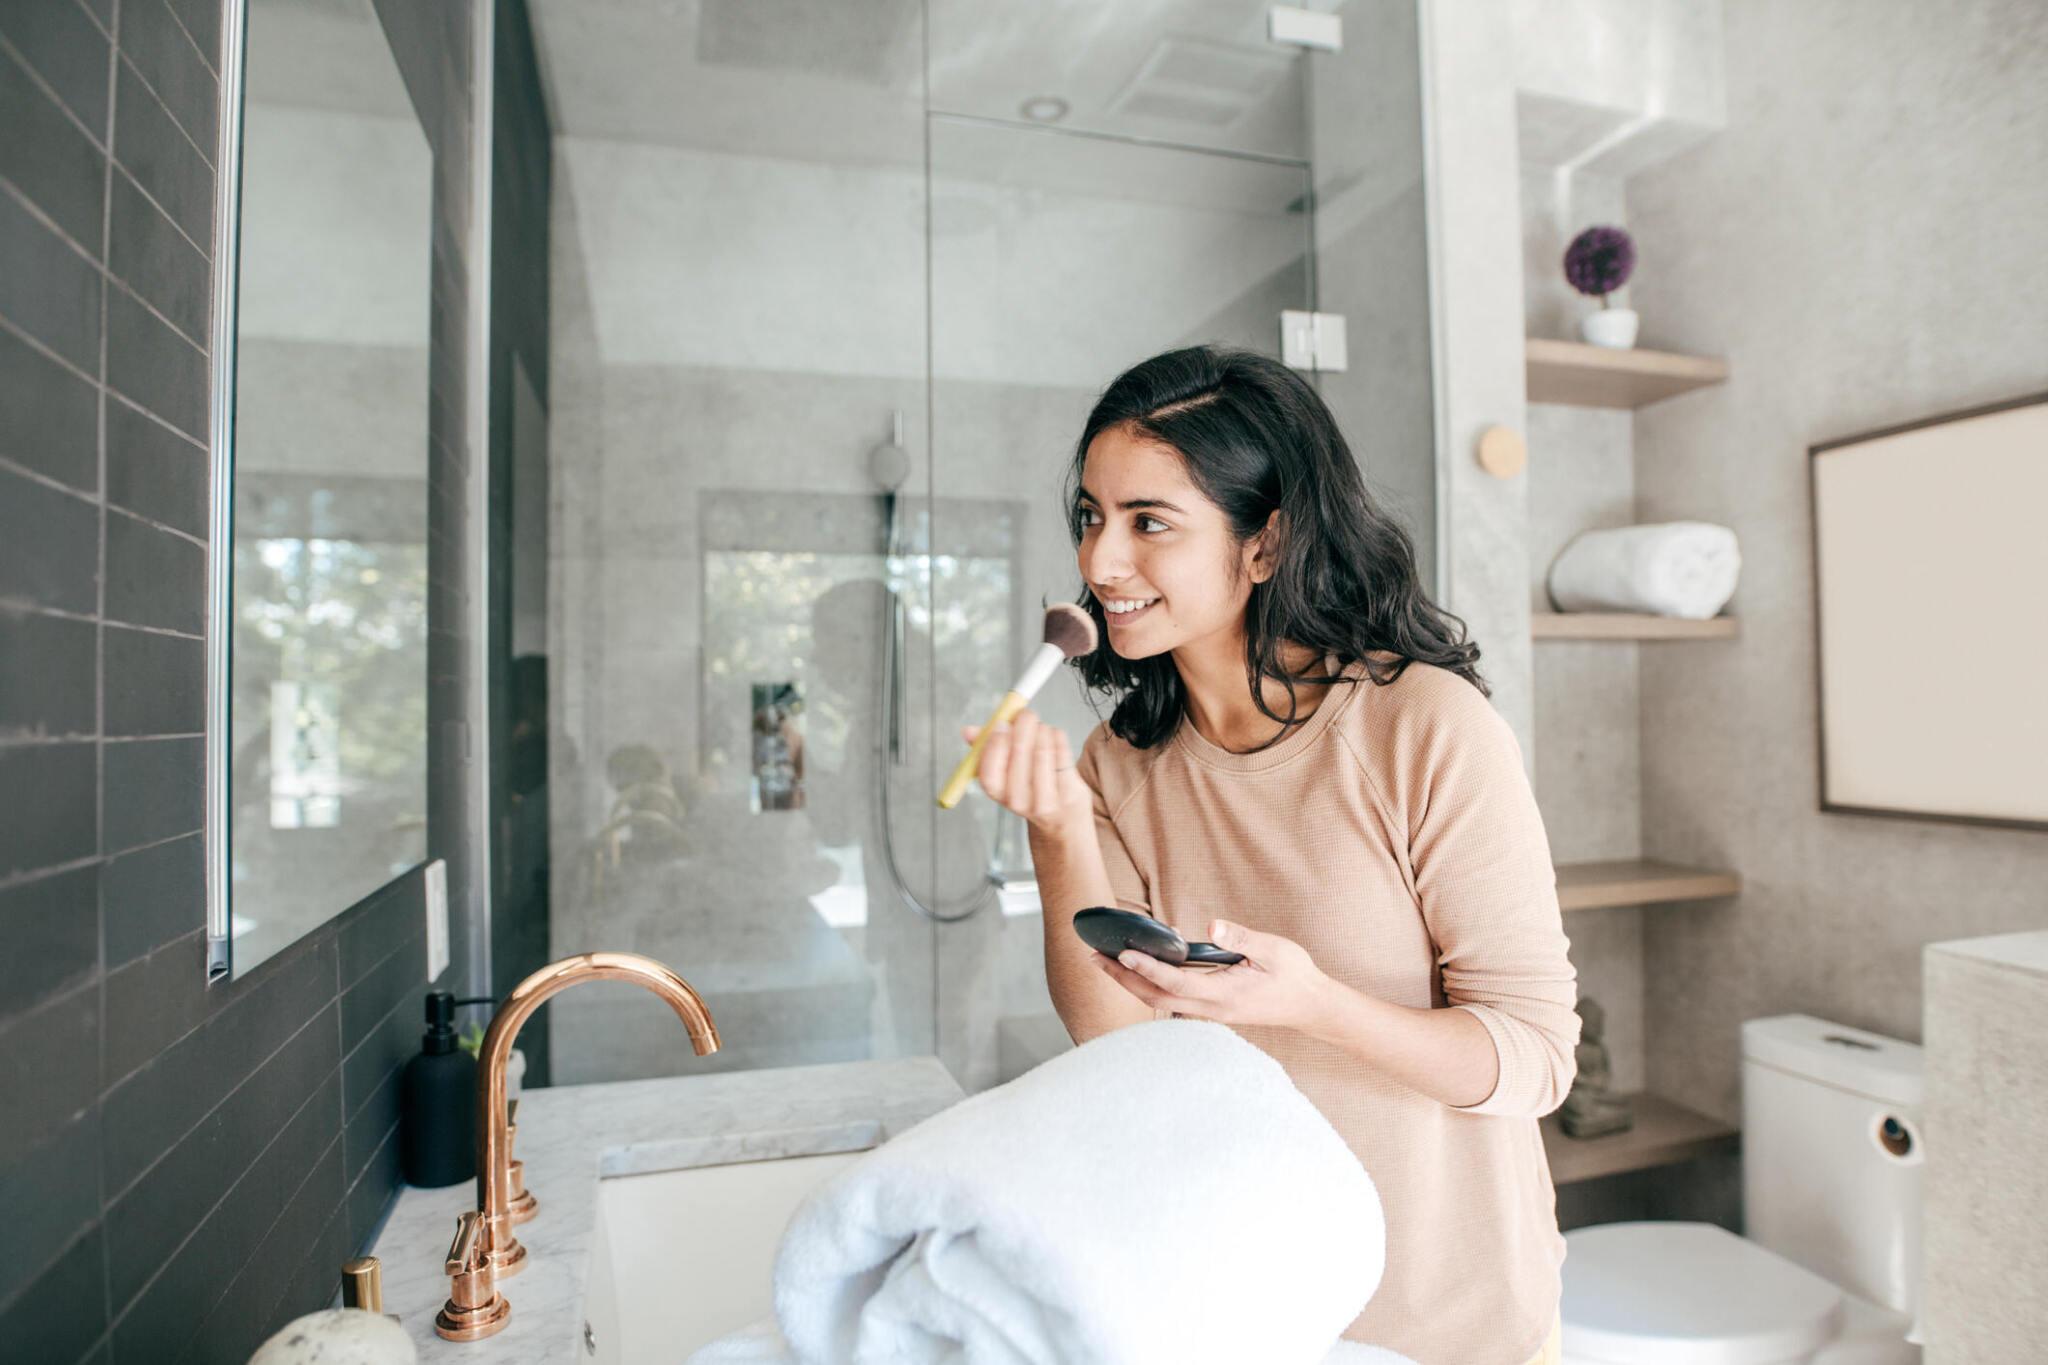 A woman brushes her teeth while looking at her reflection in a bathroom mirror, holding a smartphone in her other hand.